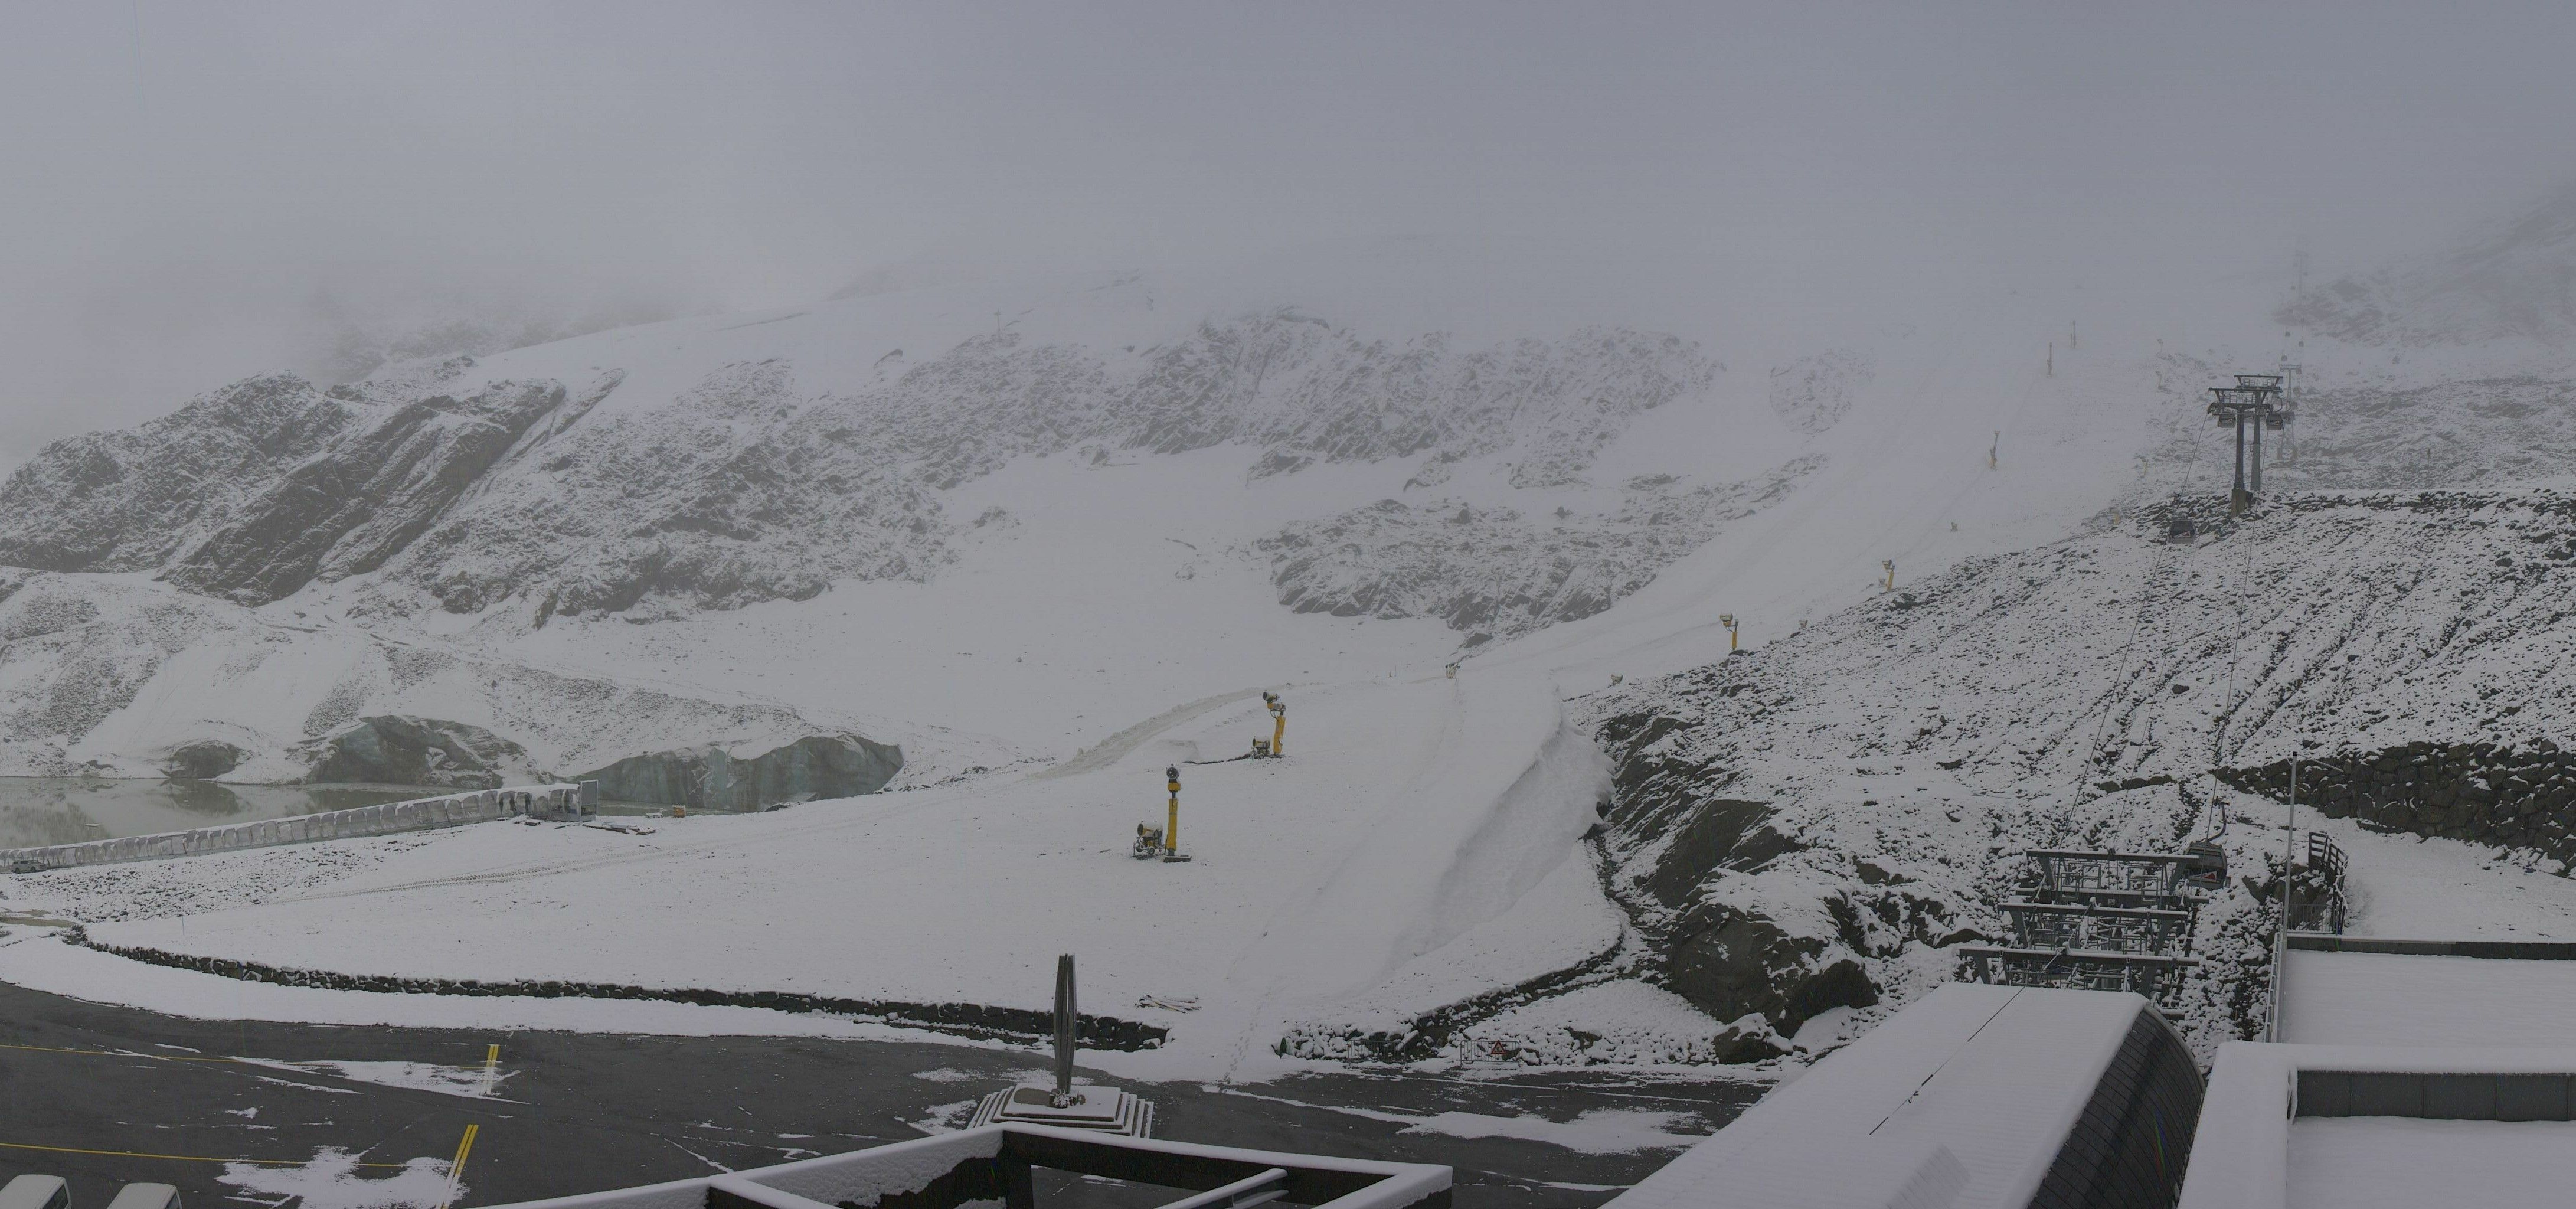 A layer of snow has also fallen in Sölden, where the lifts are open on the Rettenbachferner